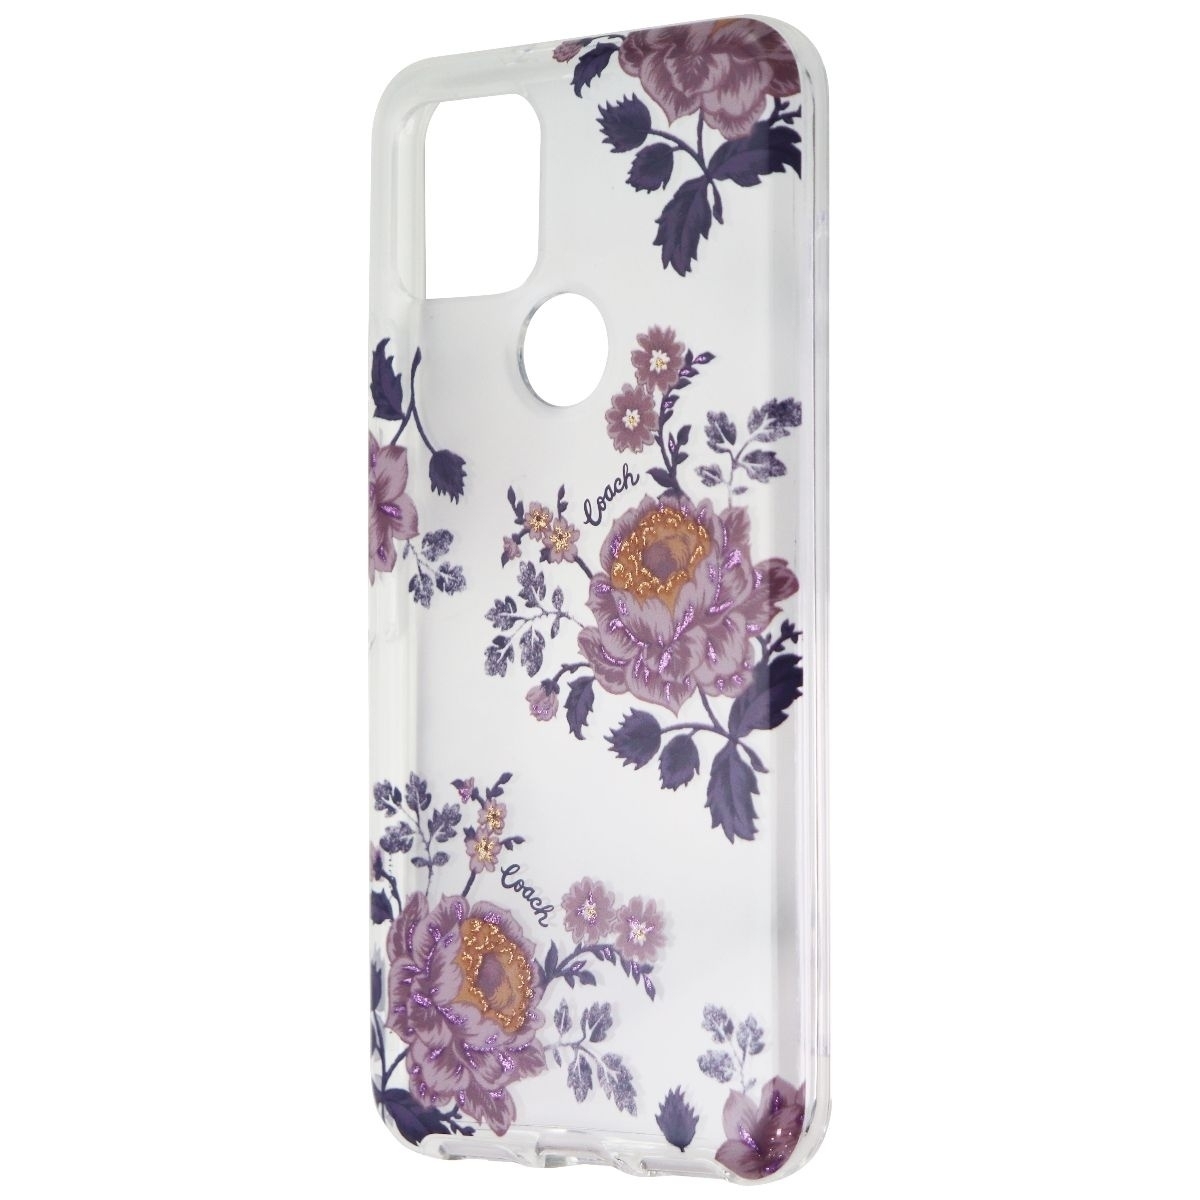 Coach Protective Hard Case For Google Pixel 5 - Moody Floral Clear